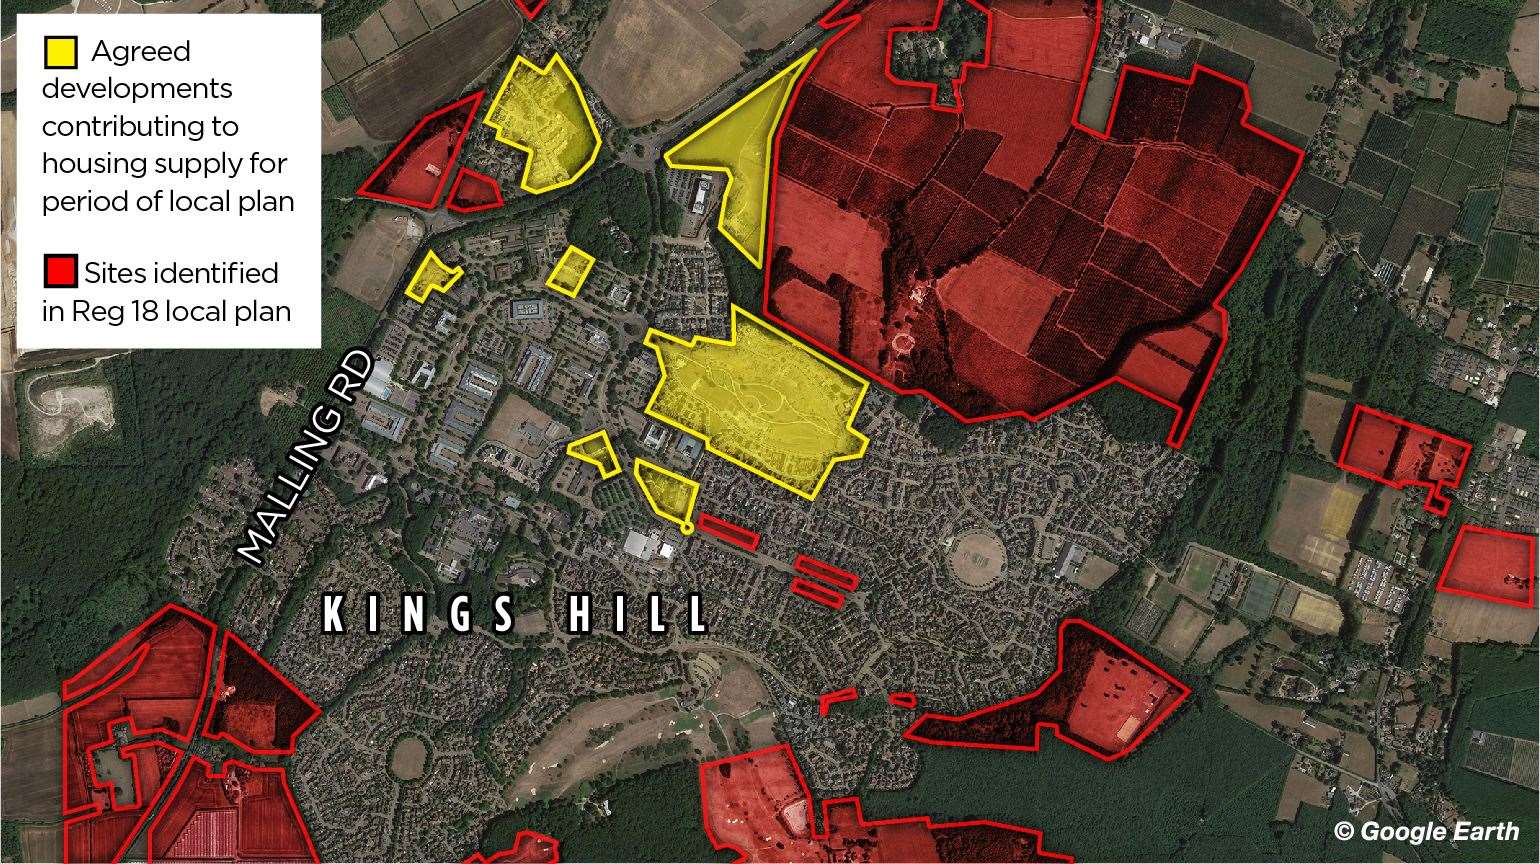 Sites identified for potential development in Kings Hill for a further 6,000 homes